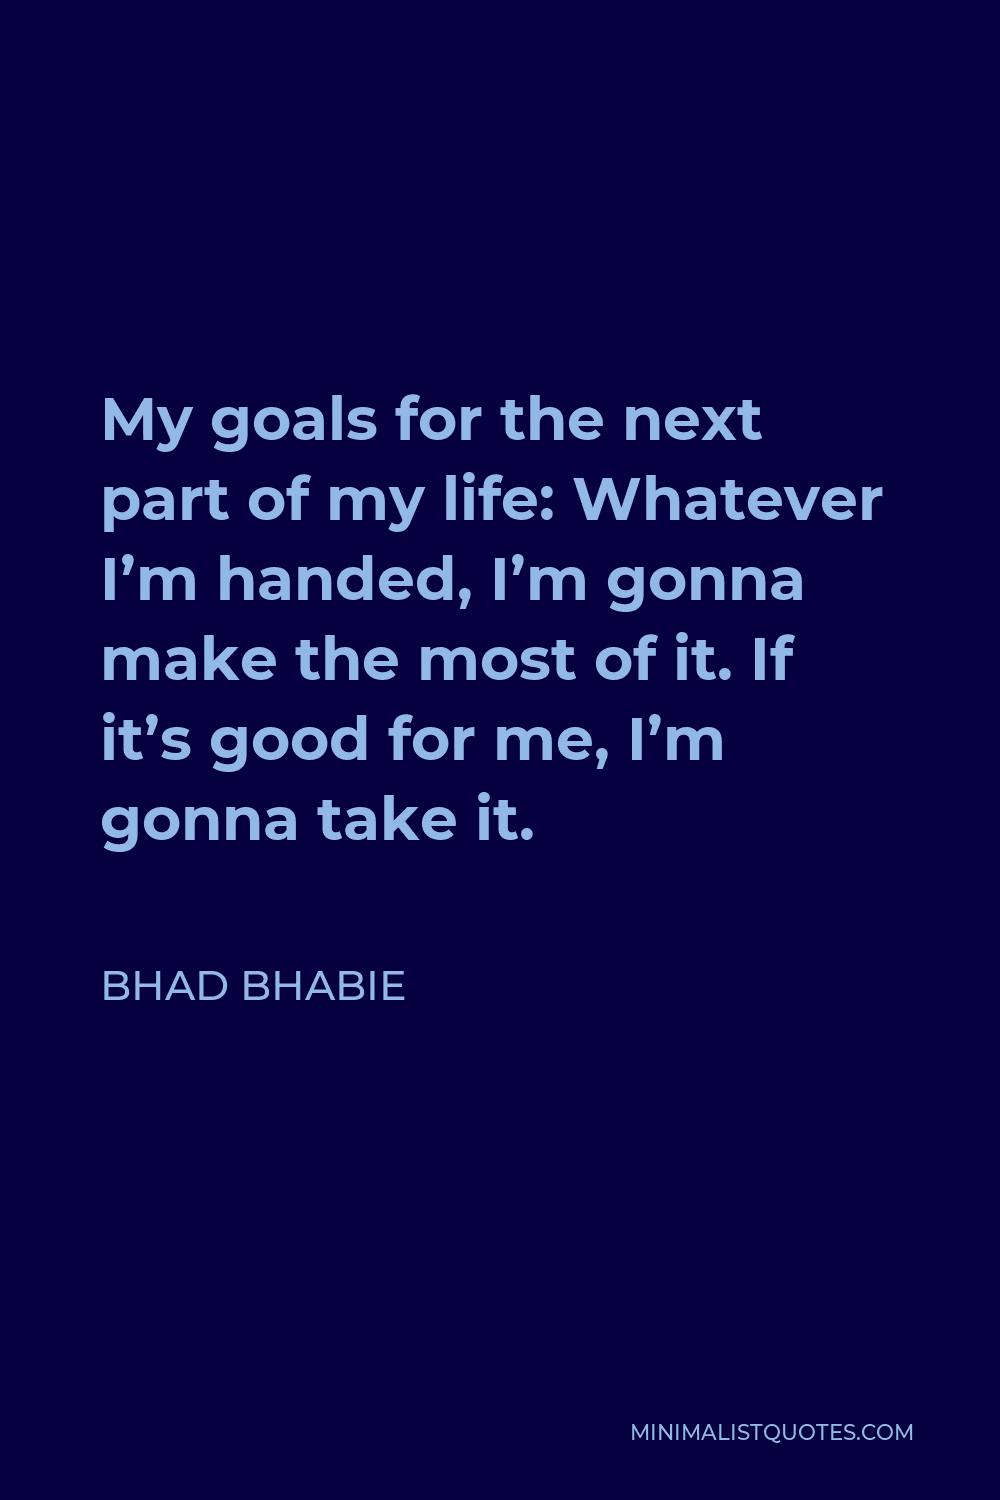 Bhad Bhabie Quote - My goals for the next part of my life: Whatever I’m handed, I’m gonna make the most of it. If it’s good for me, I’m gonna take it.